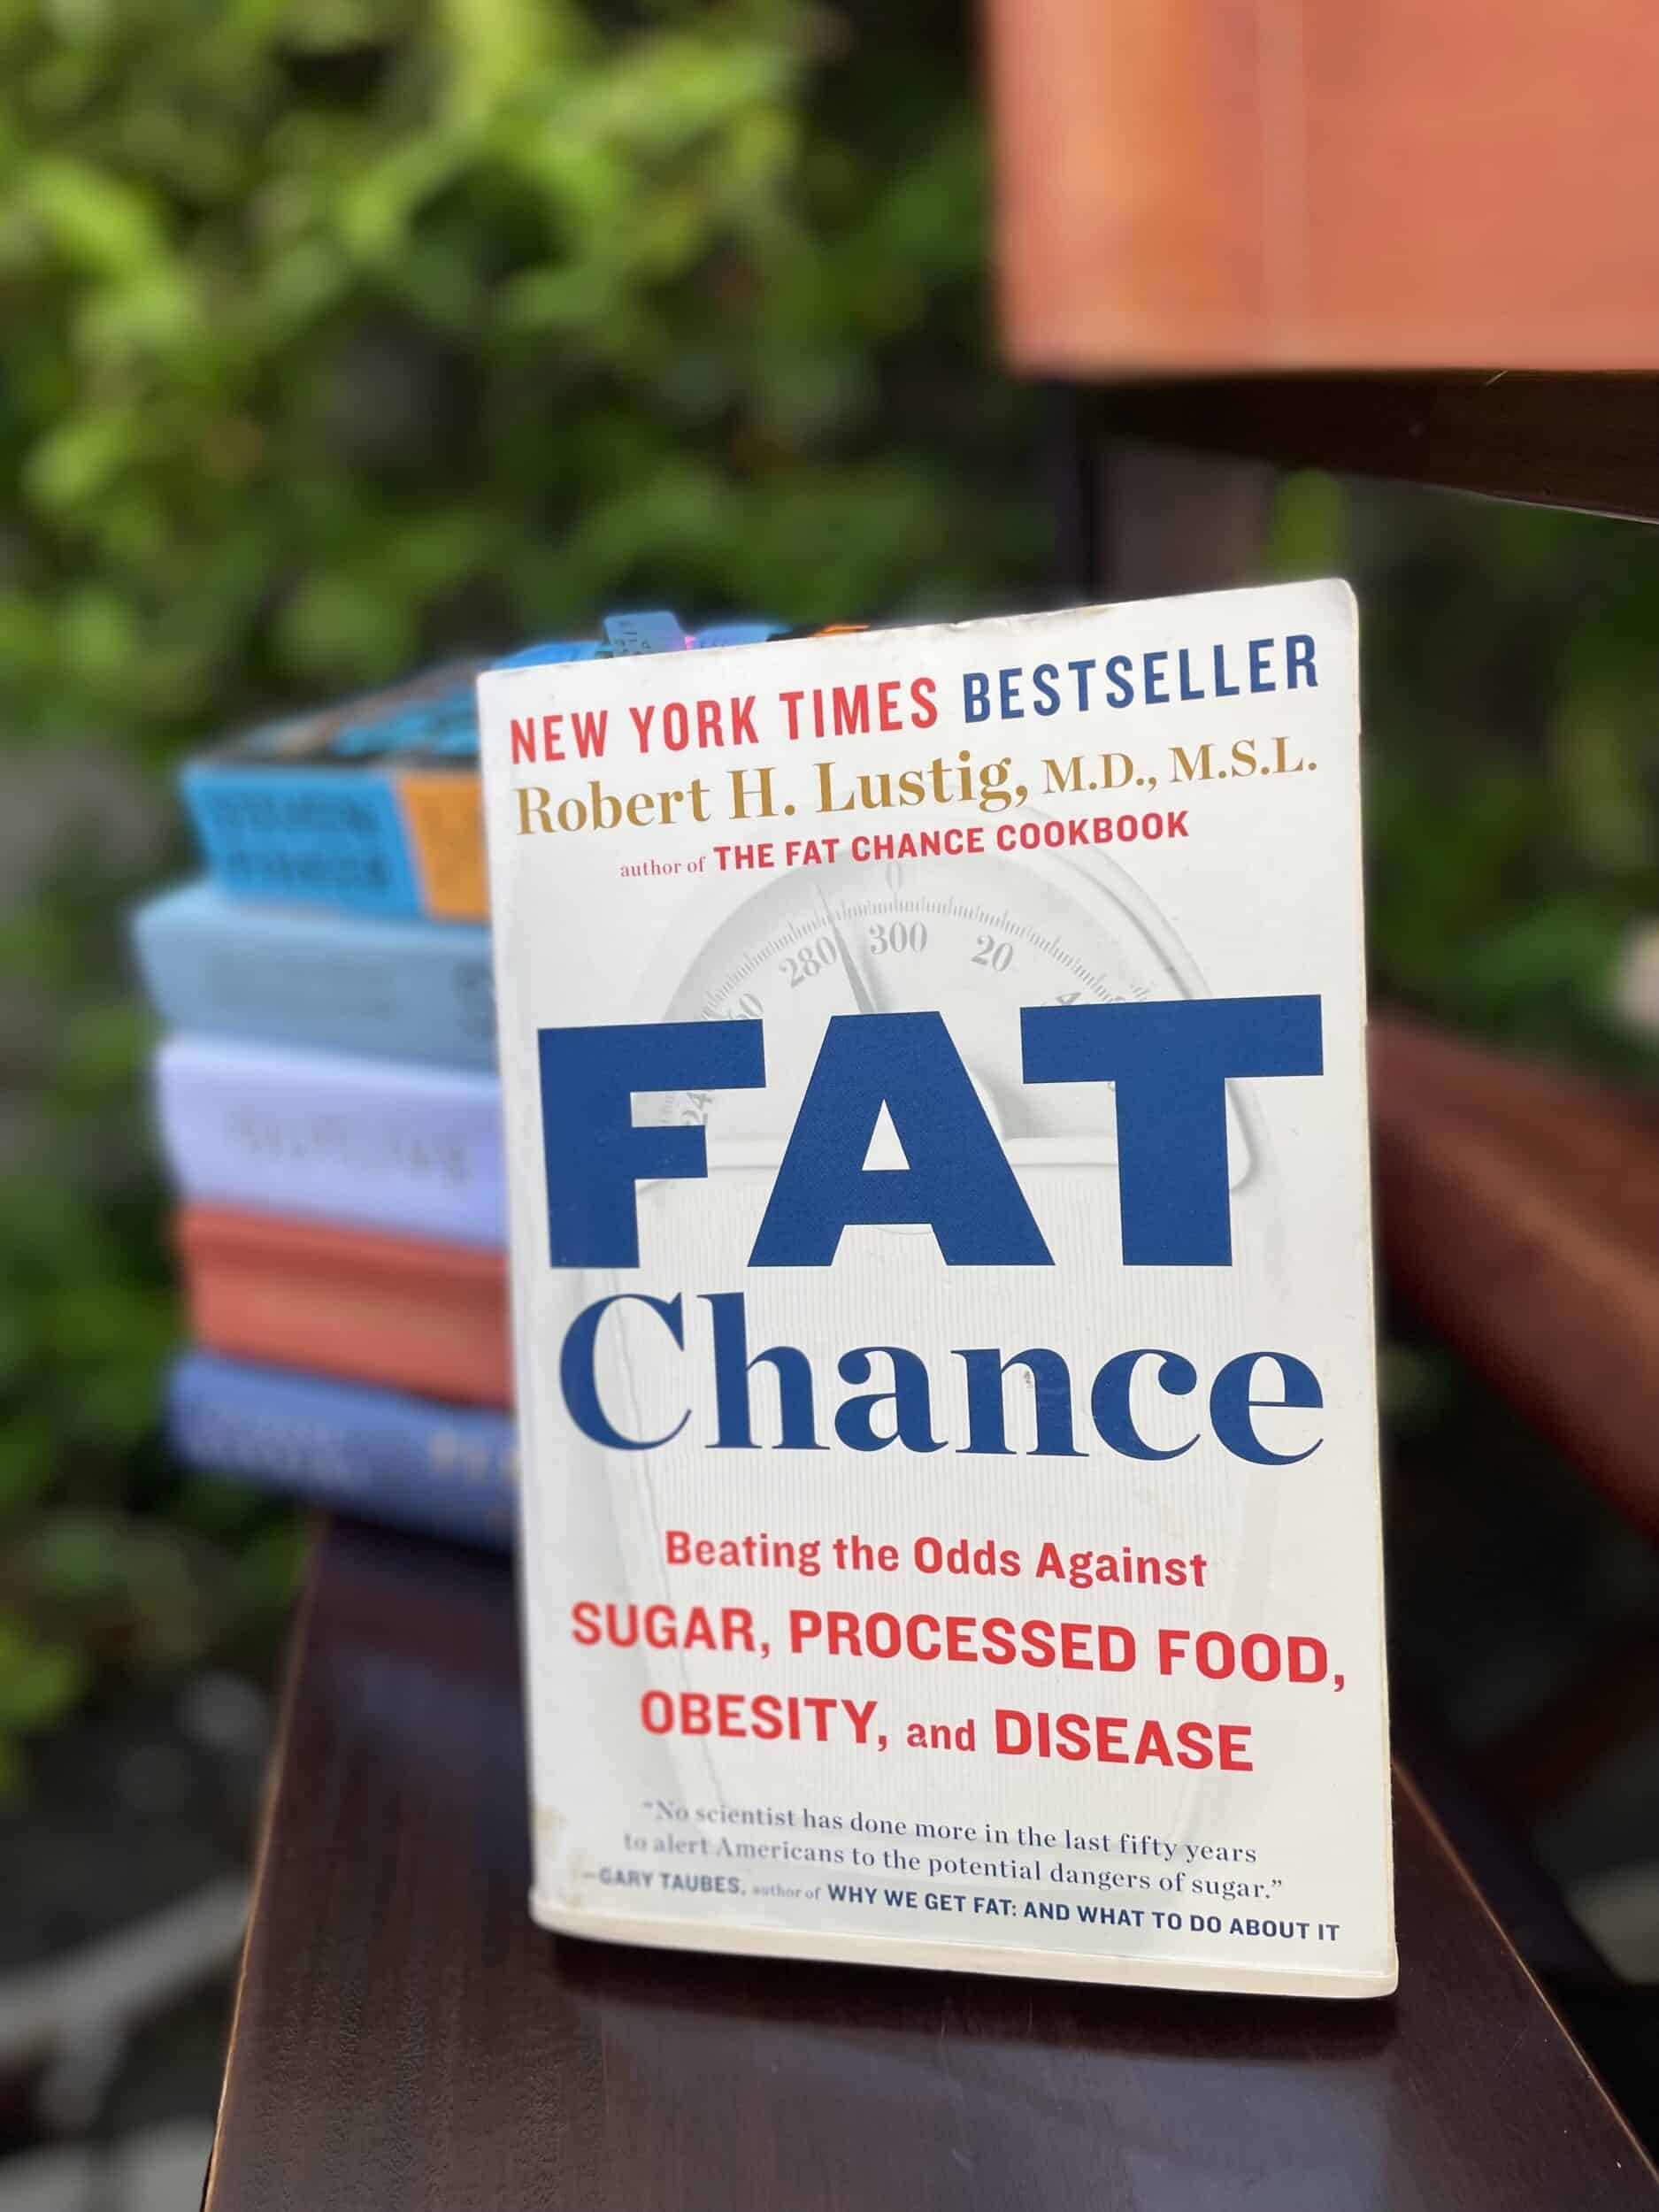 Beating the Odds Against Sugar, Processed Food, Obesity and Disease.